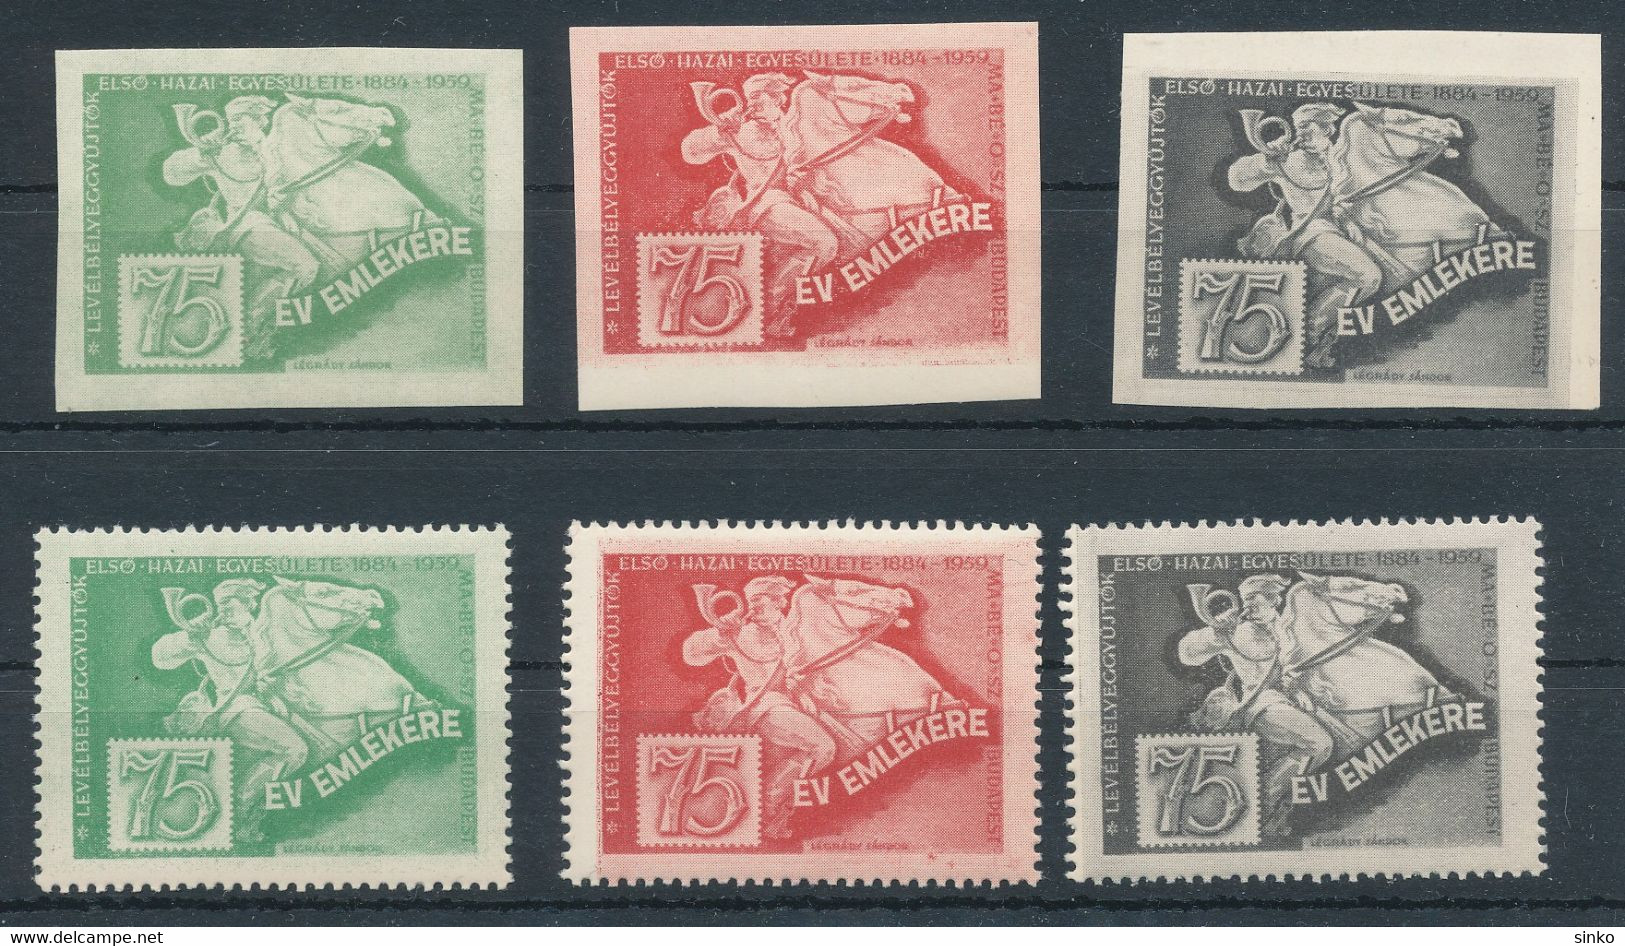 1959. The First National Association Of Hungarian Stamp Collectors Is 75 Years Old - Commemorative Stamps - Souvenirbögen